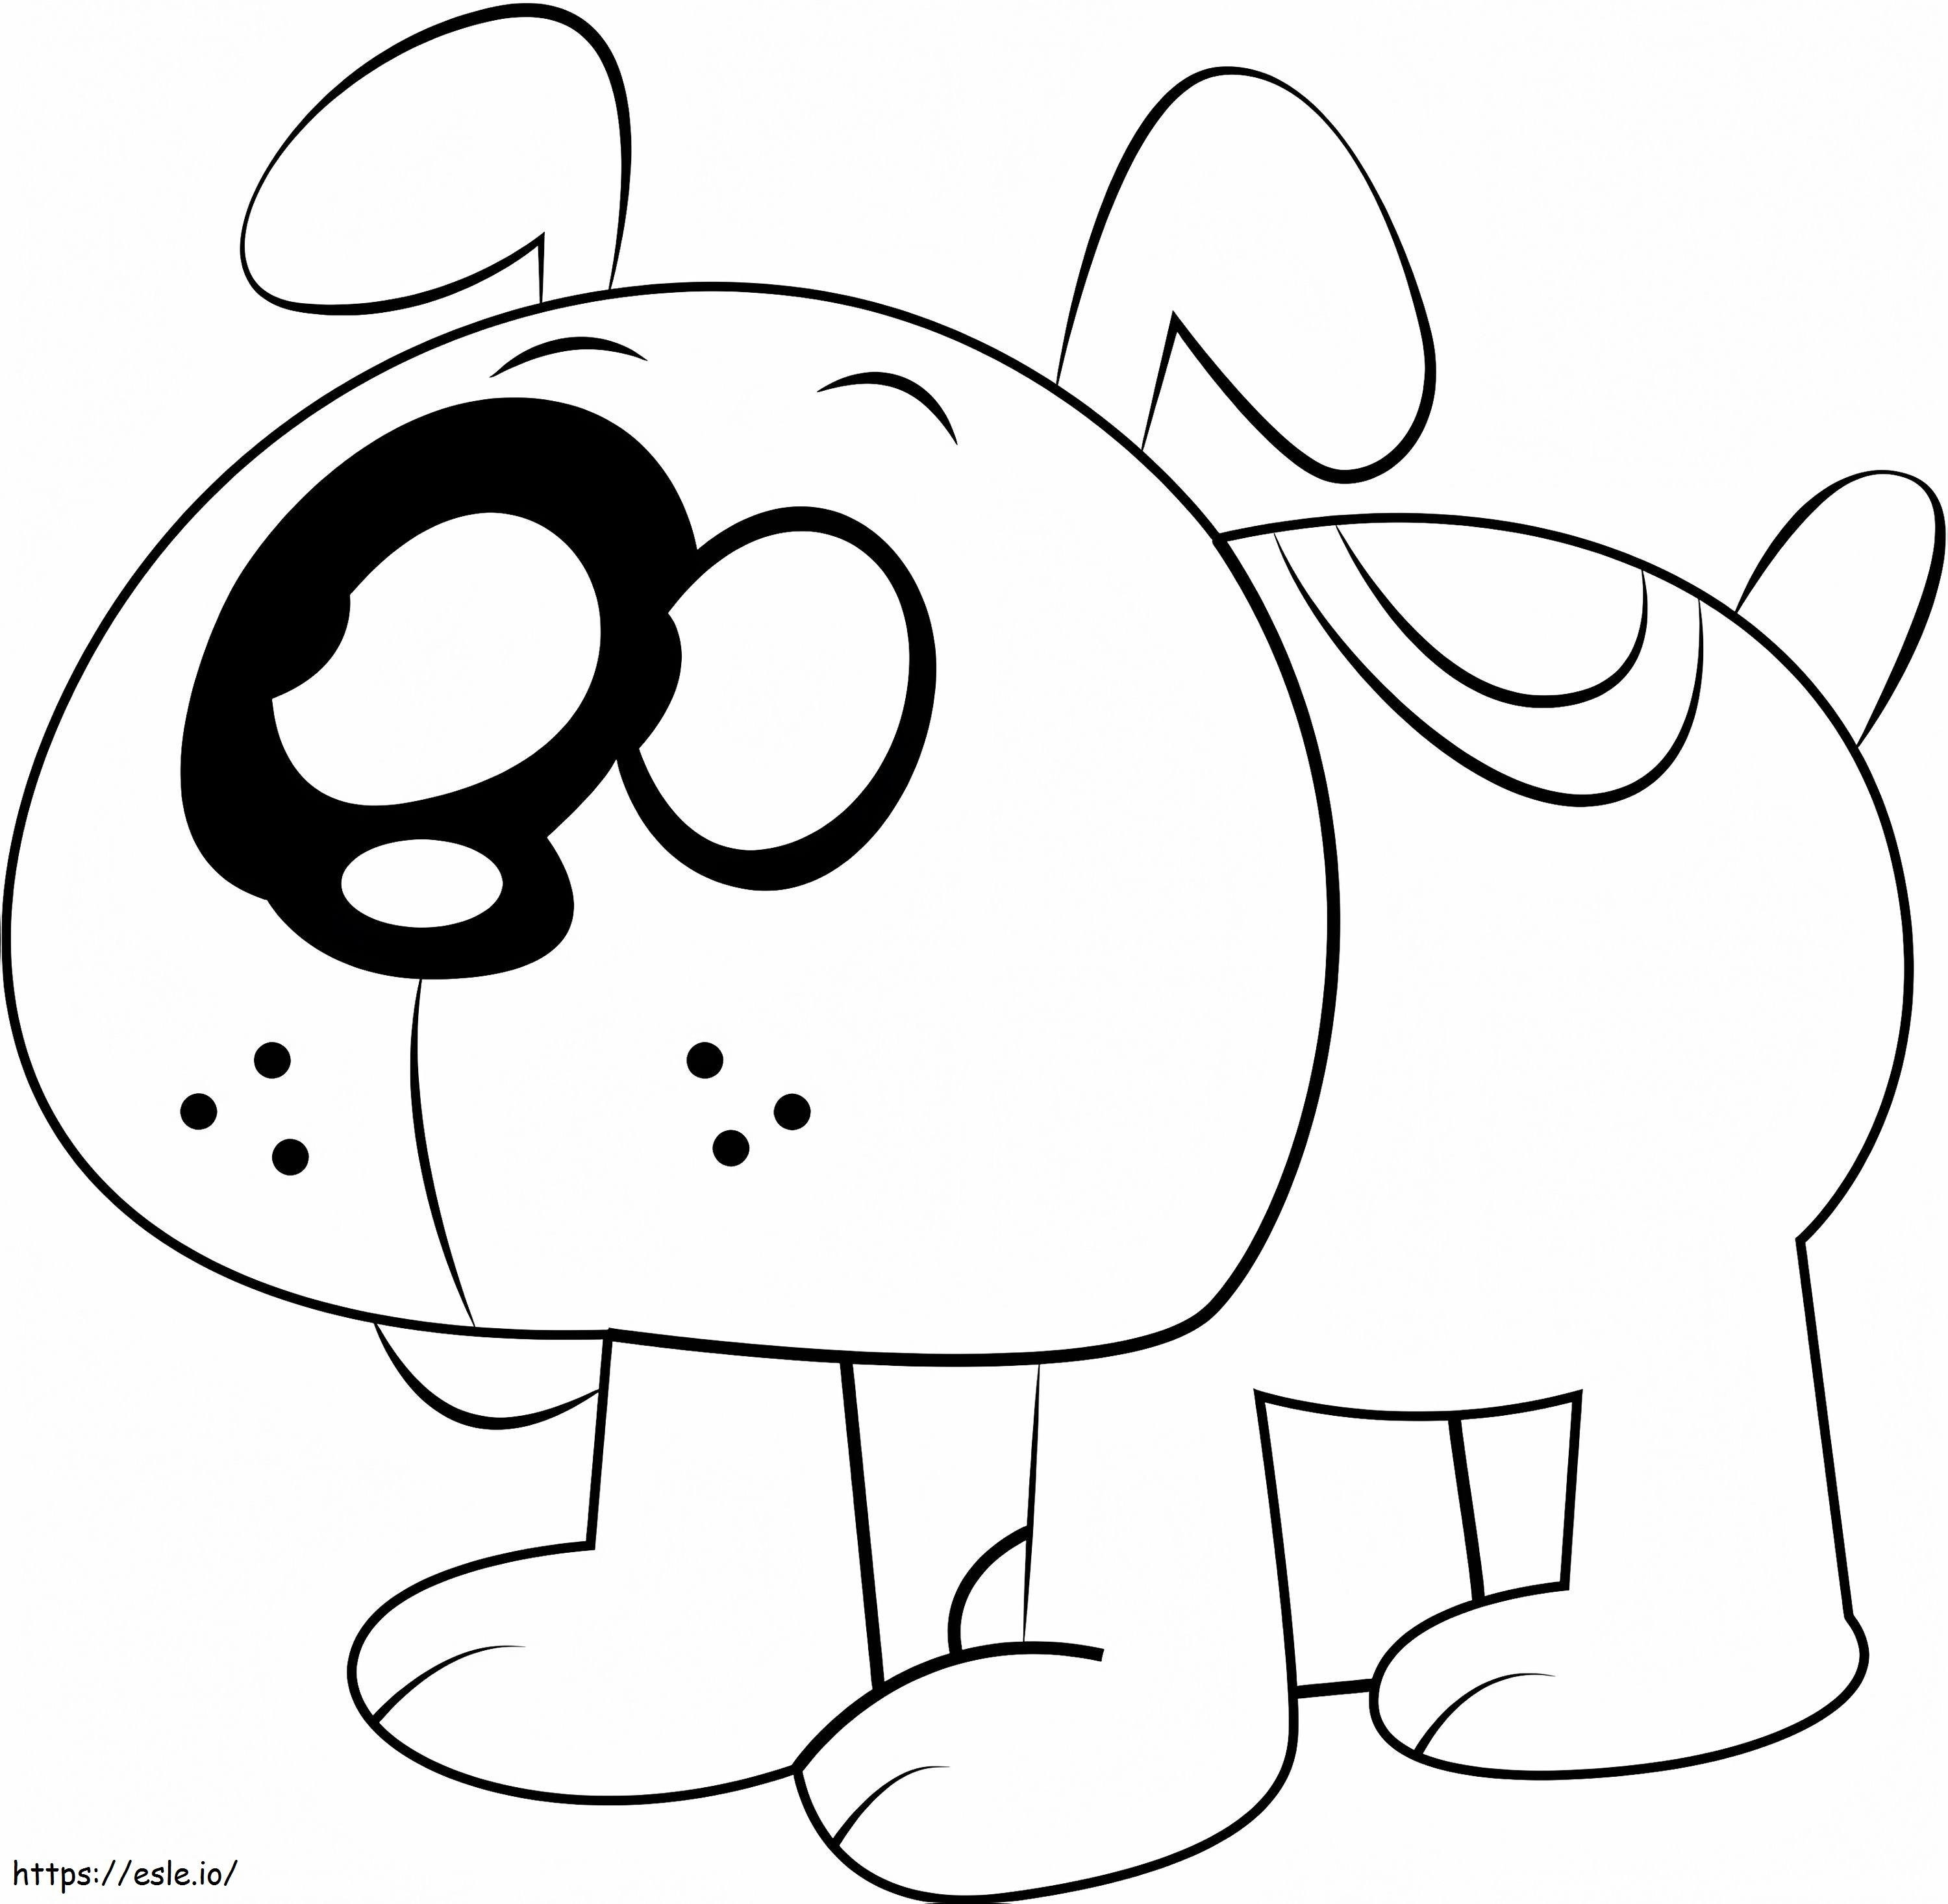 1531360509 Charles From The Loud House A4 coloring page